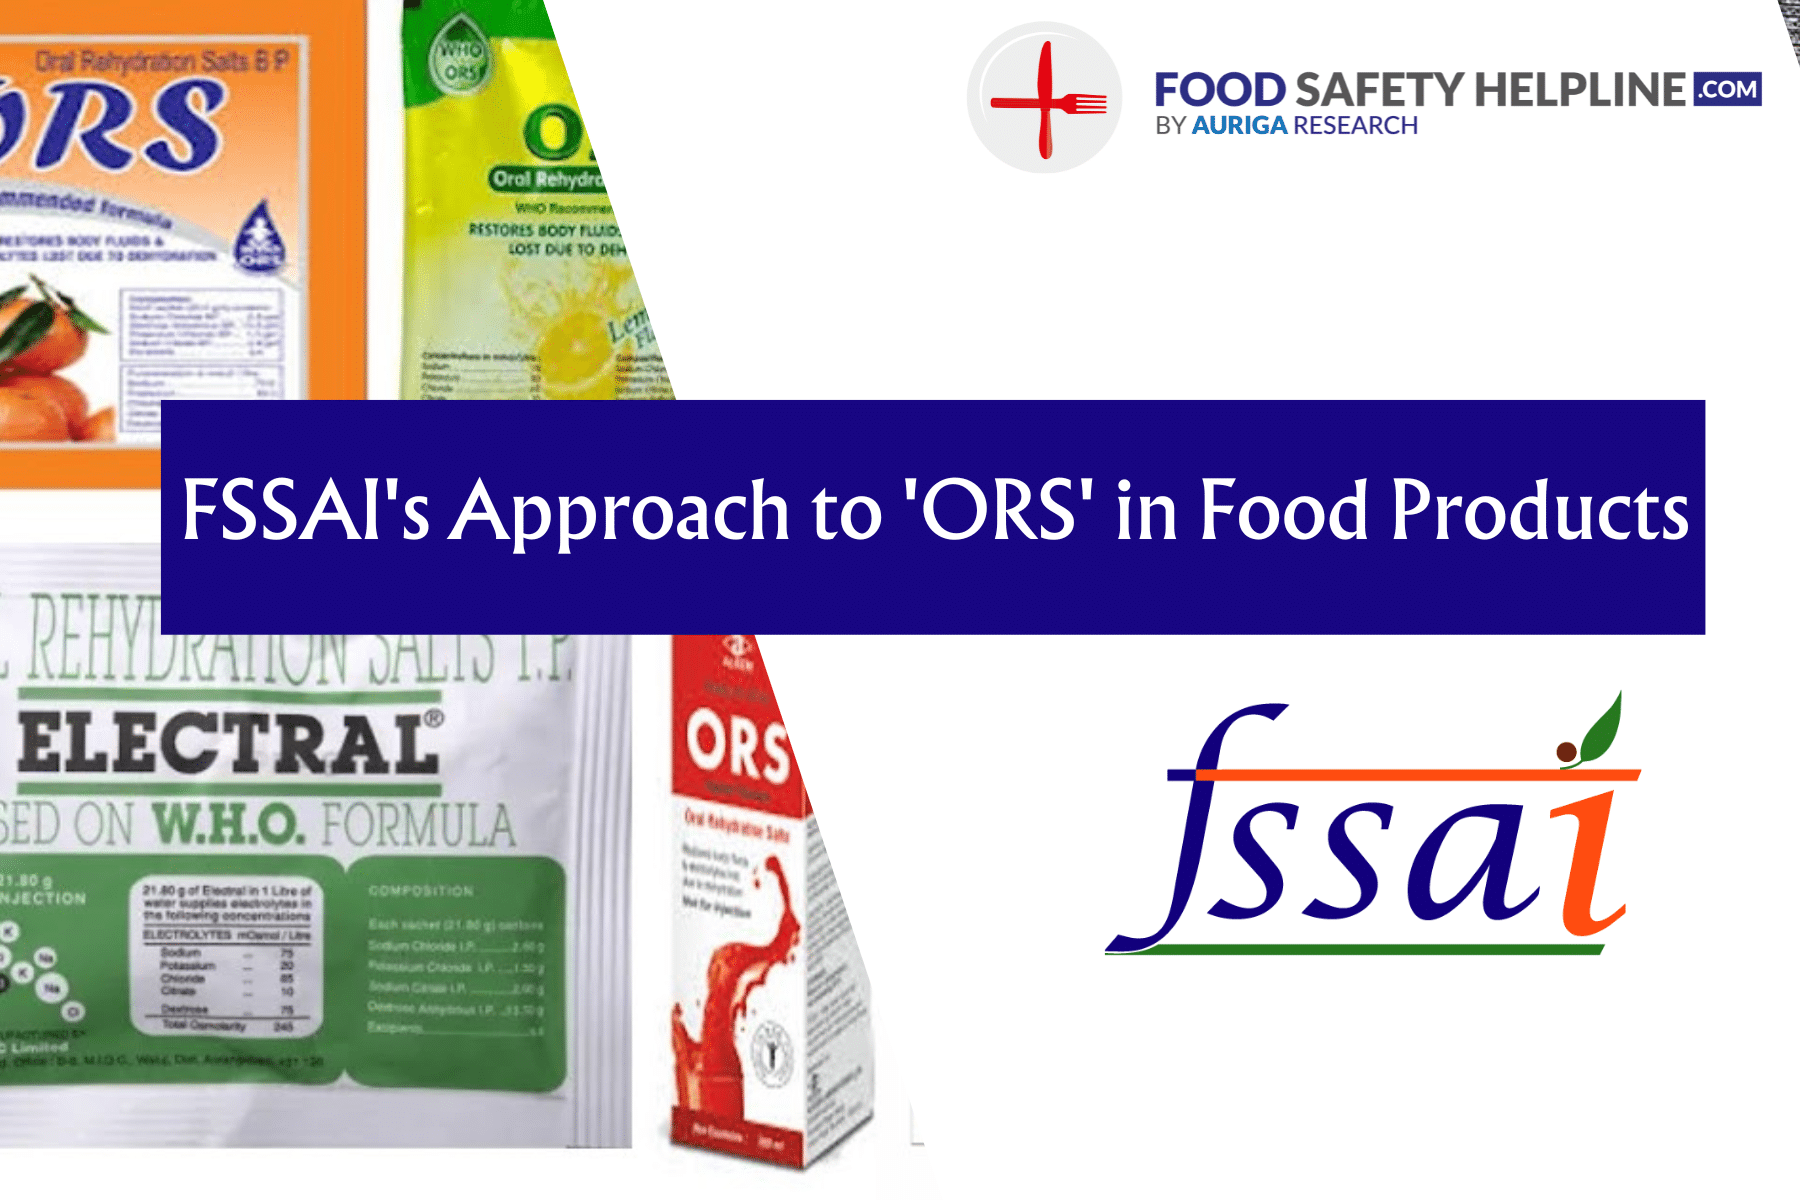 FSSAI’s Approach to ‘ORS’ in Food Products